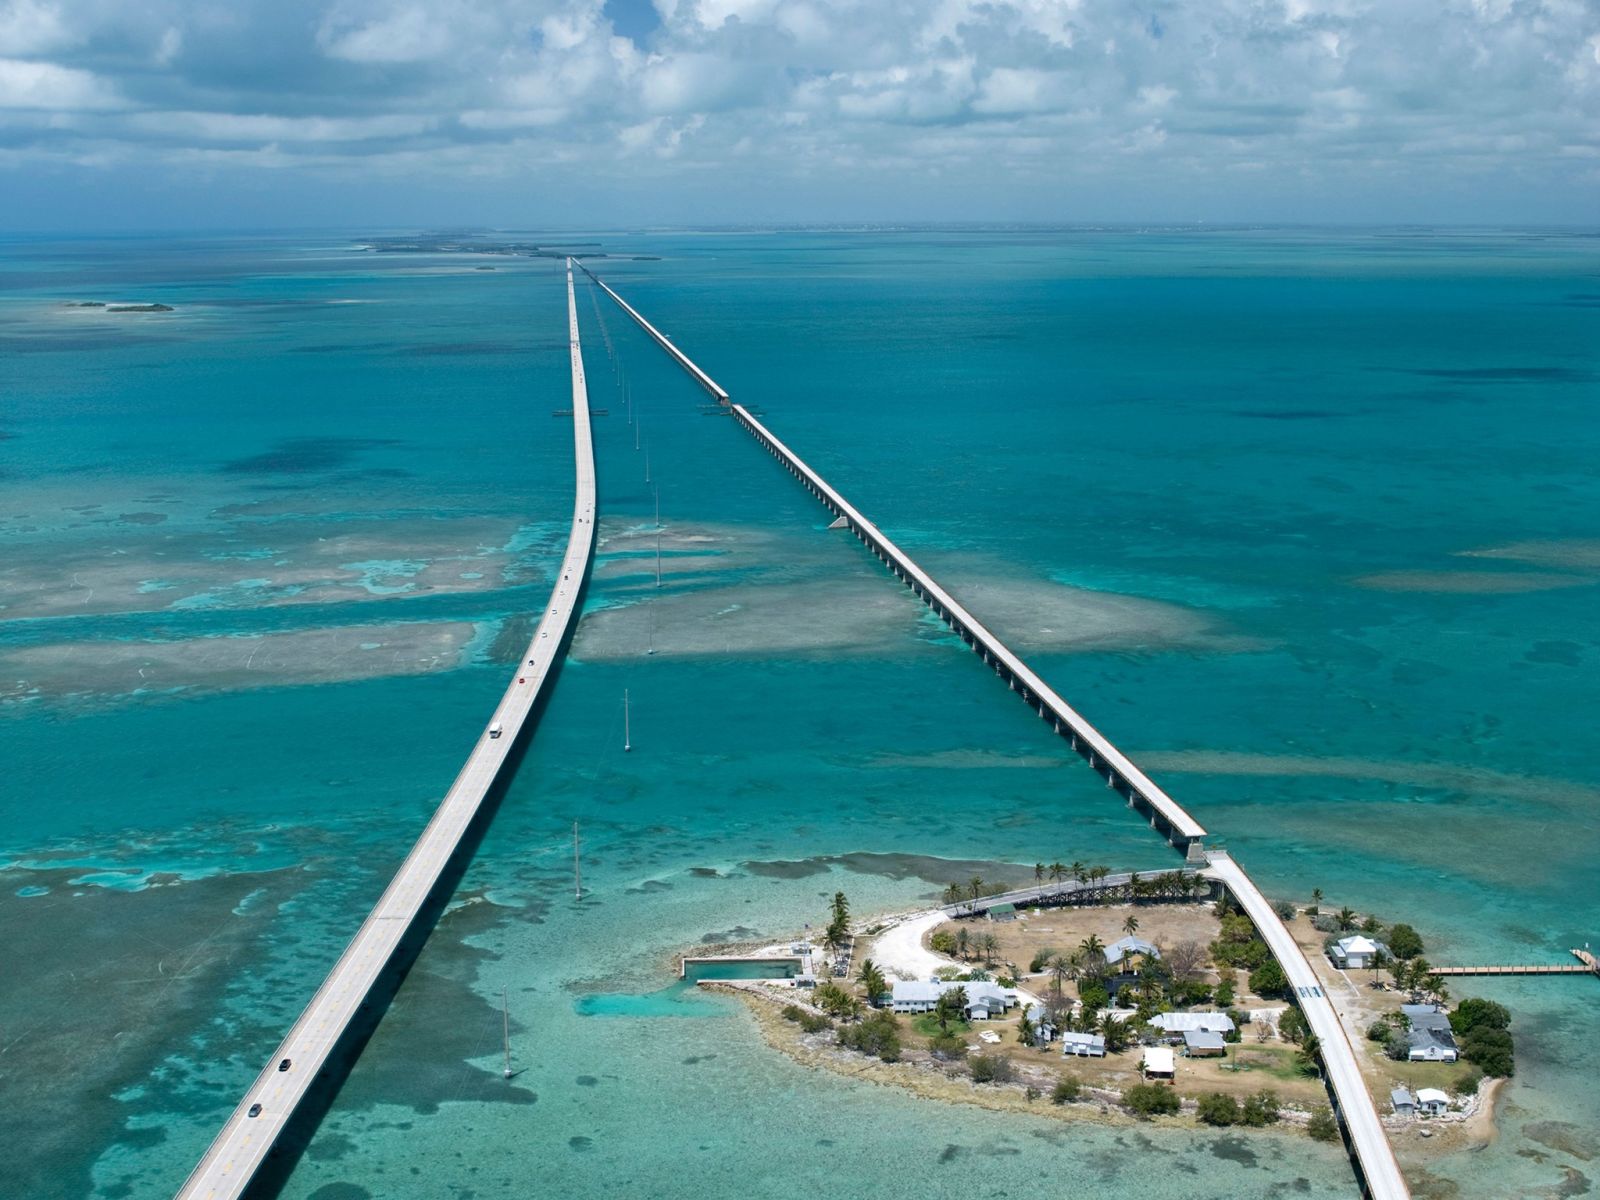 Illustration for article titled Going down route 1 to Key West